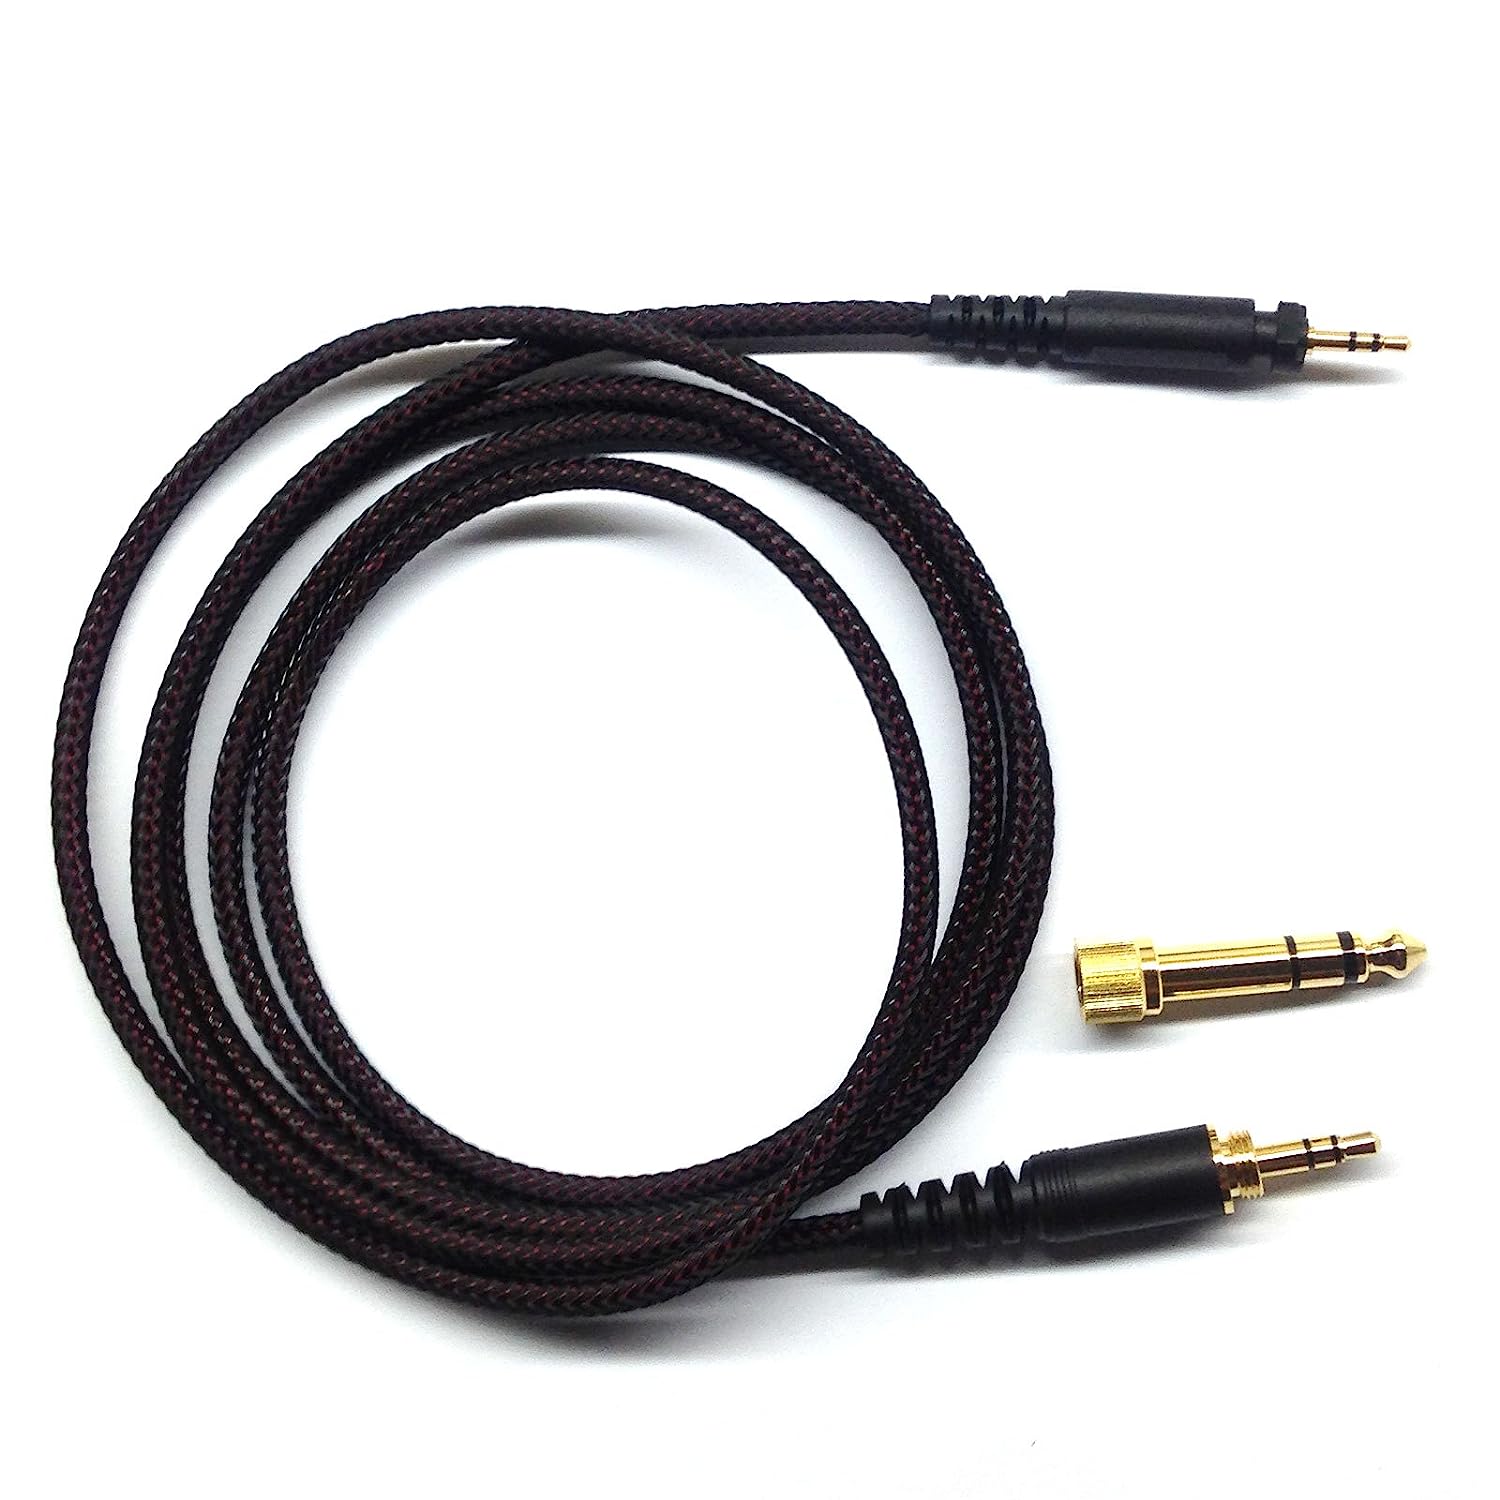 NEW NEOMUSICIA Replacement Cable for SHURE SRH840 [...]